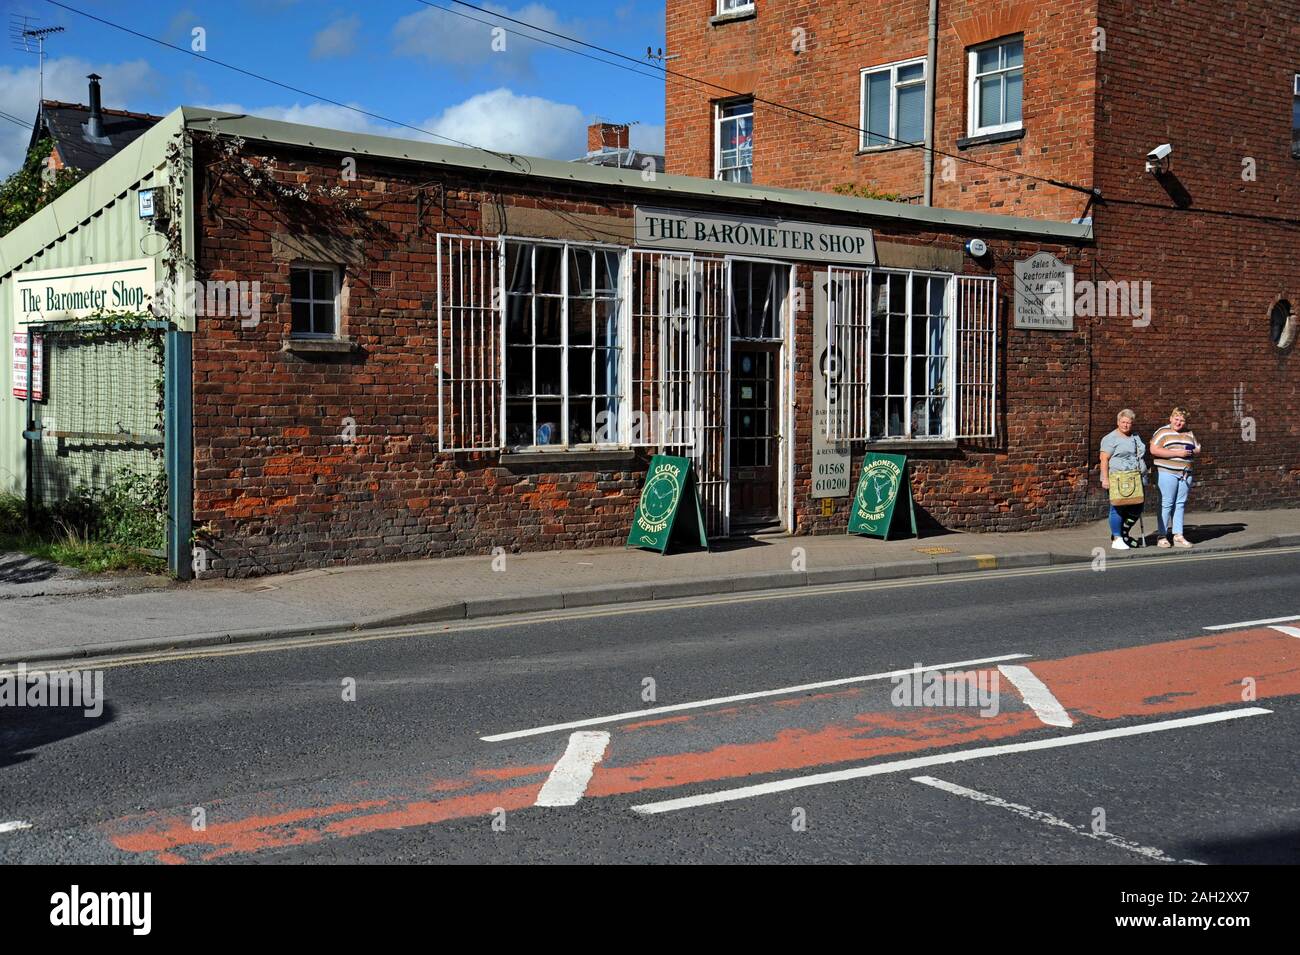 The Barometer Shop, Leominster, Herefordshire, a well known landmark in this popular antiques town. Stock Photo